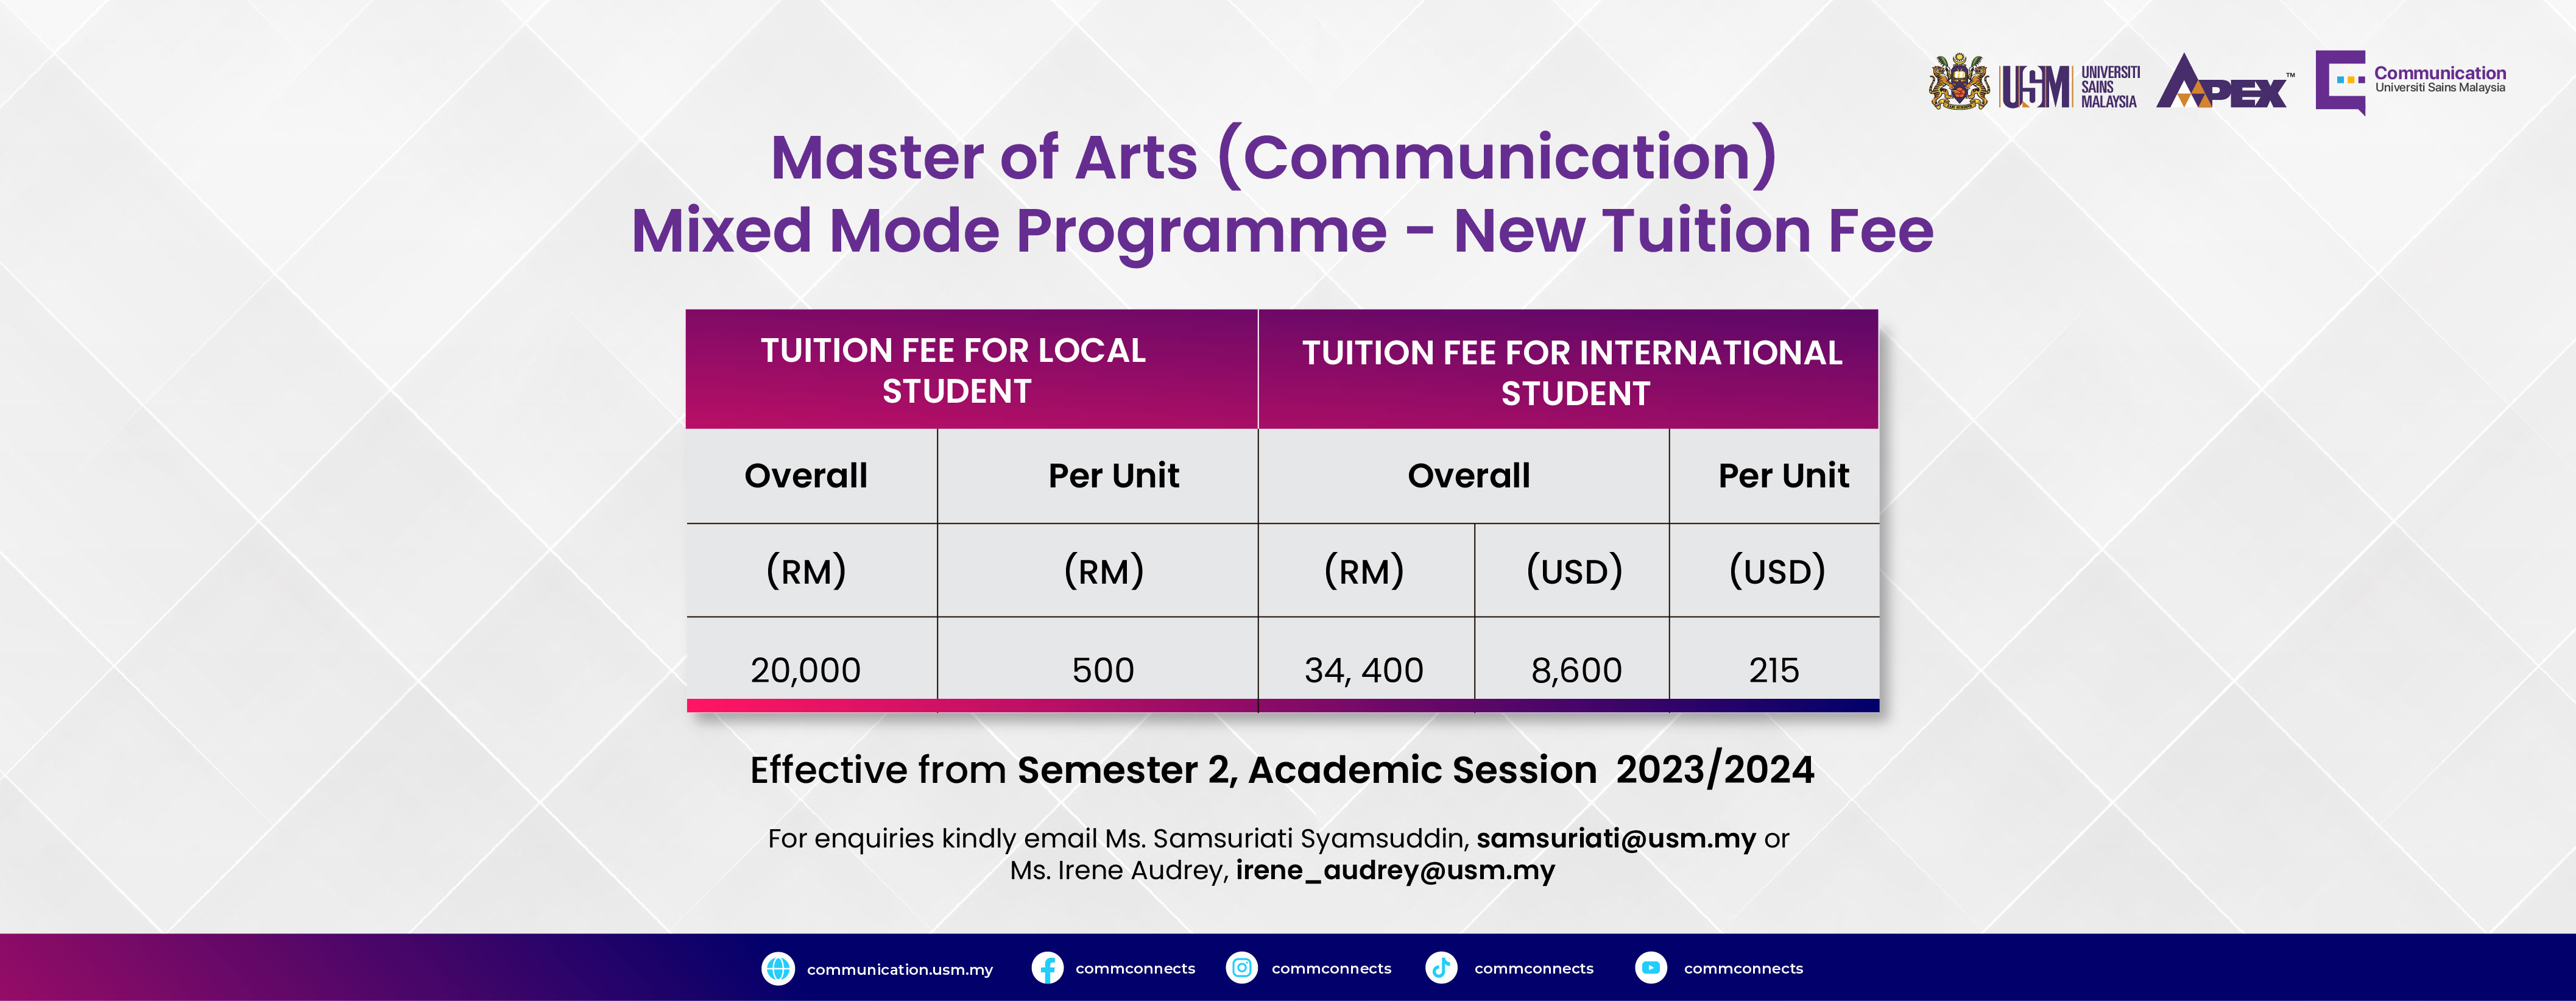 Master of Arts Communication Mixed Mode Programme New Tuition Fee 03